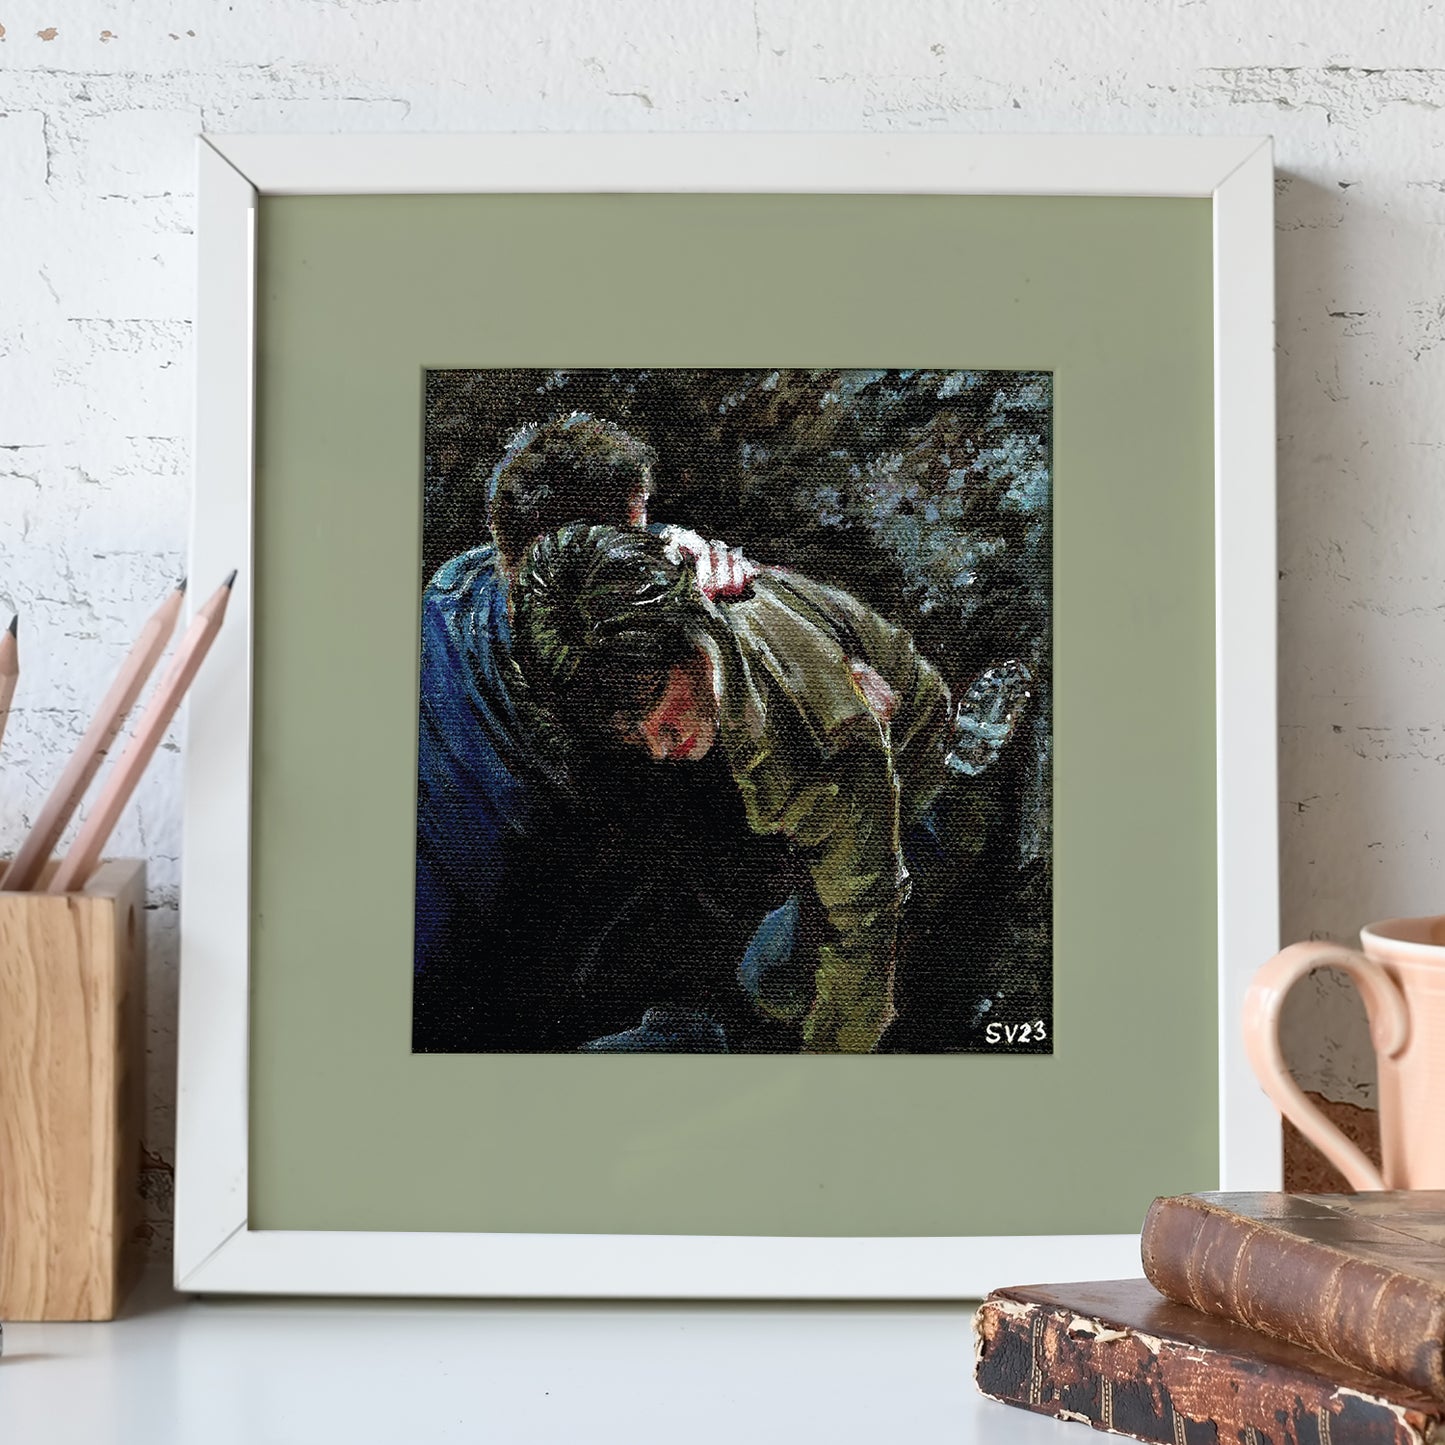 A painting mounted on a green background in a white frame. The painting shows Sam and Dean Winchester embracing each other in a dark forest. Behind the painting is a white brick wall.